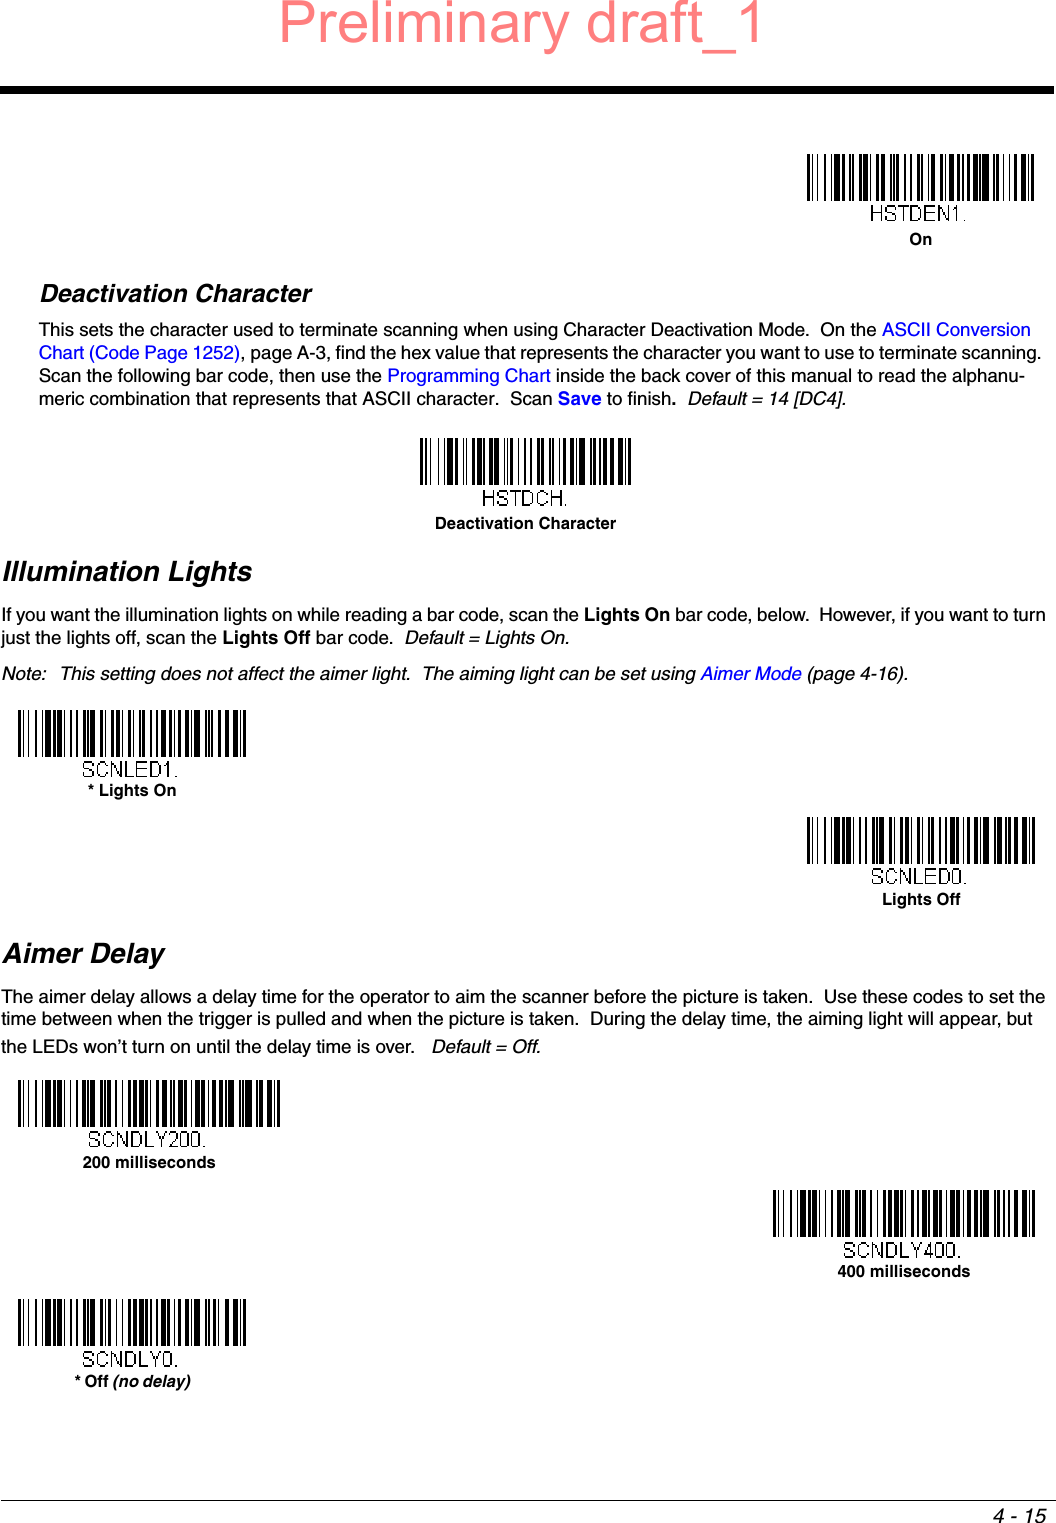 4 - 15Deactivation CharacterThis sets the character used to terminate scanning when using Character Deactivation Mode.  On the ASCII Conversion Chart (Code Page 1252), page A-3, find the hex value that represents the character you want to use to terminate scanning.  Scan the following bar code, then use the Programming Chart inside the back cover of this manual to read the alphanu-meric combination that represents that ASCII character.  Scan Save to finish.  Default = 14 [DC4].Illumination LightsIf you want the illumination lights on while reading a bar code, scan the Lights On bar code, below.  However, if you want to turn just the lights off, scan the Lights Off bar code.  Default = Lights On.Note: This setting does not affect the aimer light.  The aiming light can be set using Aimer Mode (page 4-16).   Aimer DelayThe aimer delay allows a delay time for the operator to aim the scanner before the picture is taken.  Use these codes to set the time between when the trigger is pulled and when the picture is taken.  During the delay time, the aiming light will appear, but the LEDs won’t turn on until the delay time is over.   Default = Off.OnDeactivation Character* Lights OnLights Off200 milliseconds400 milliseconds* Off (no delay)Preliminary draft_1